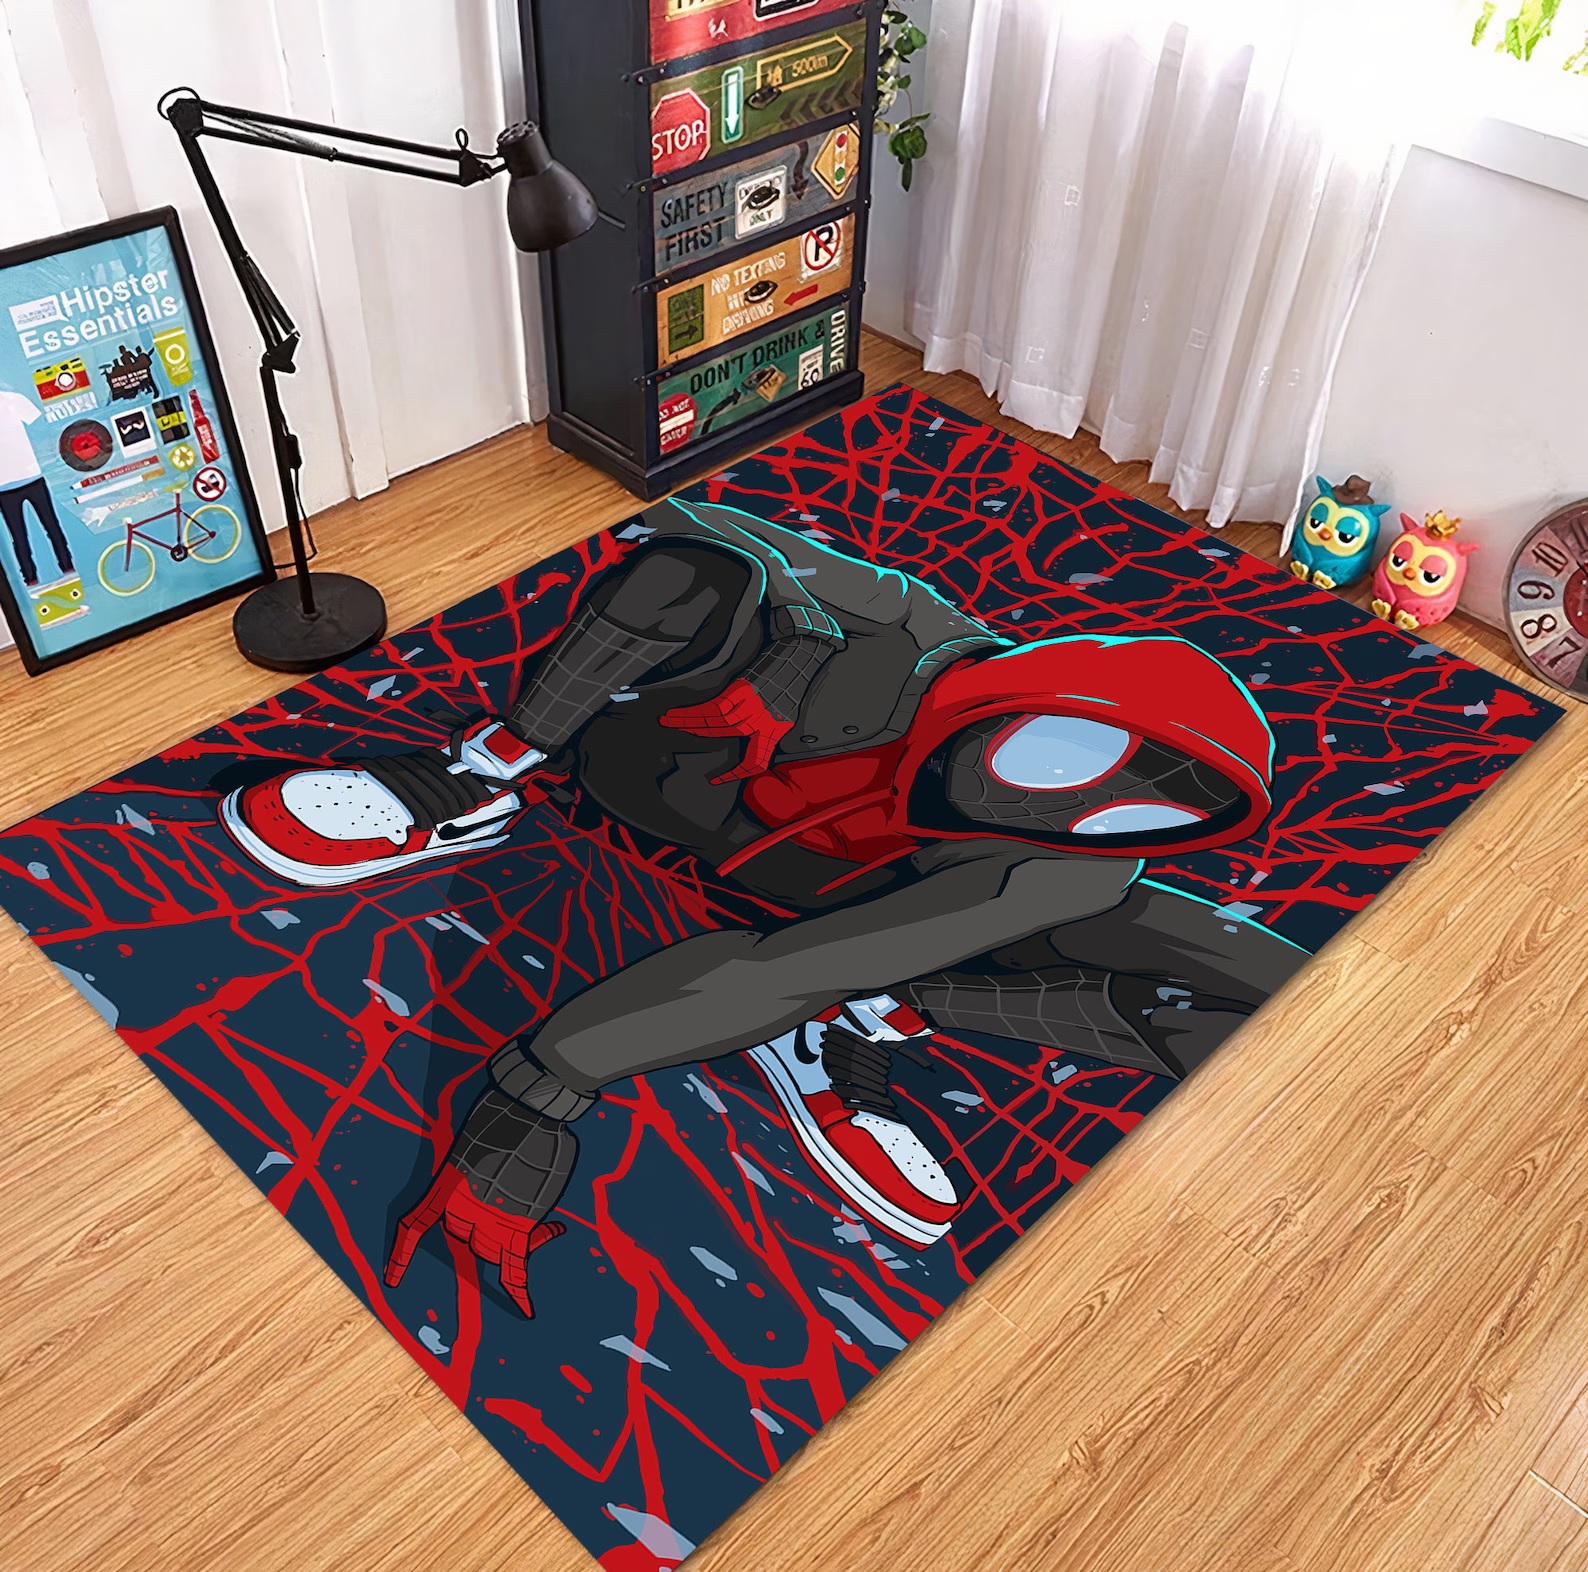 A rectangular rug on a wooden floor. The rug is black and red and features an image of Miles Morales as Spider-Man, squatting amid a red web pattern